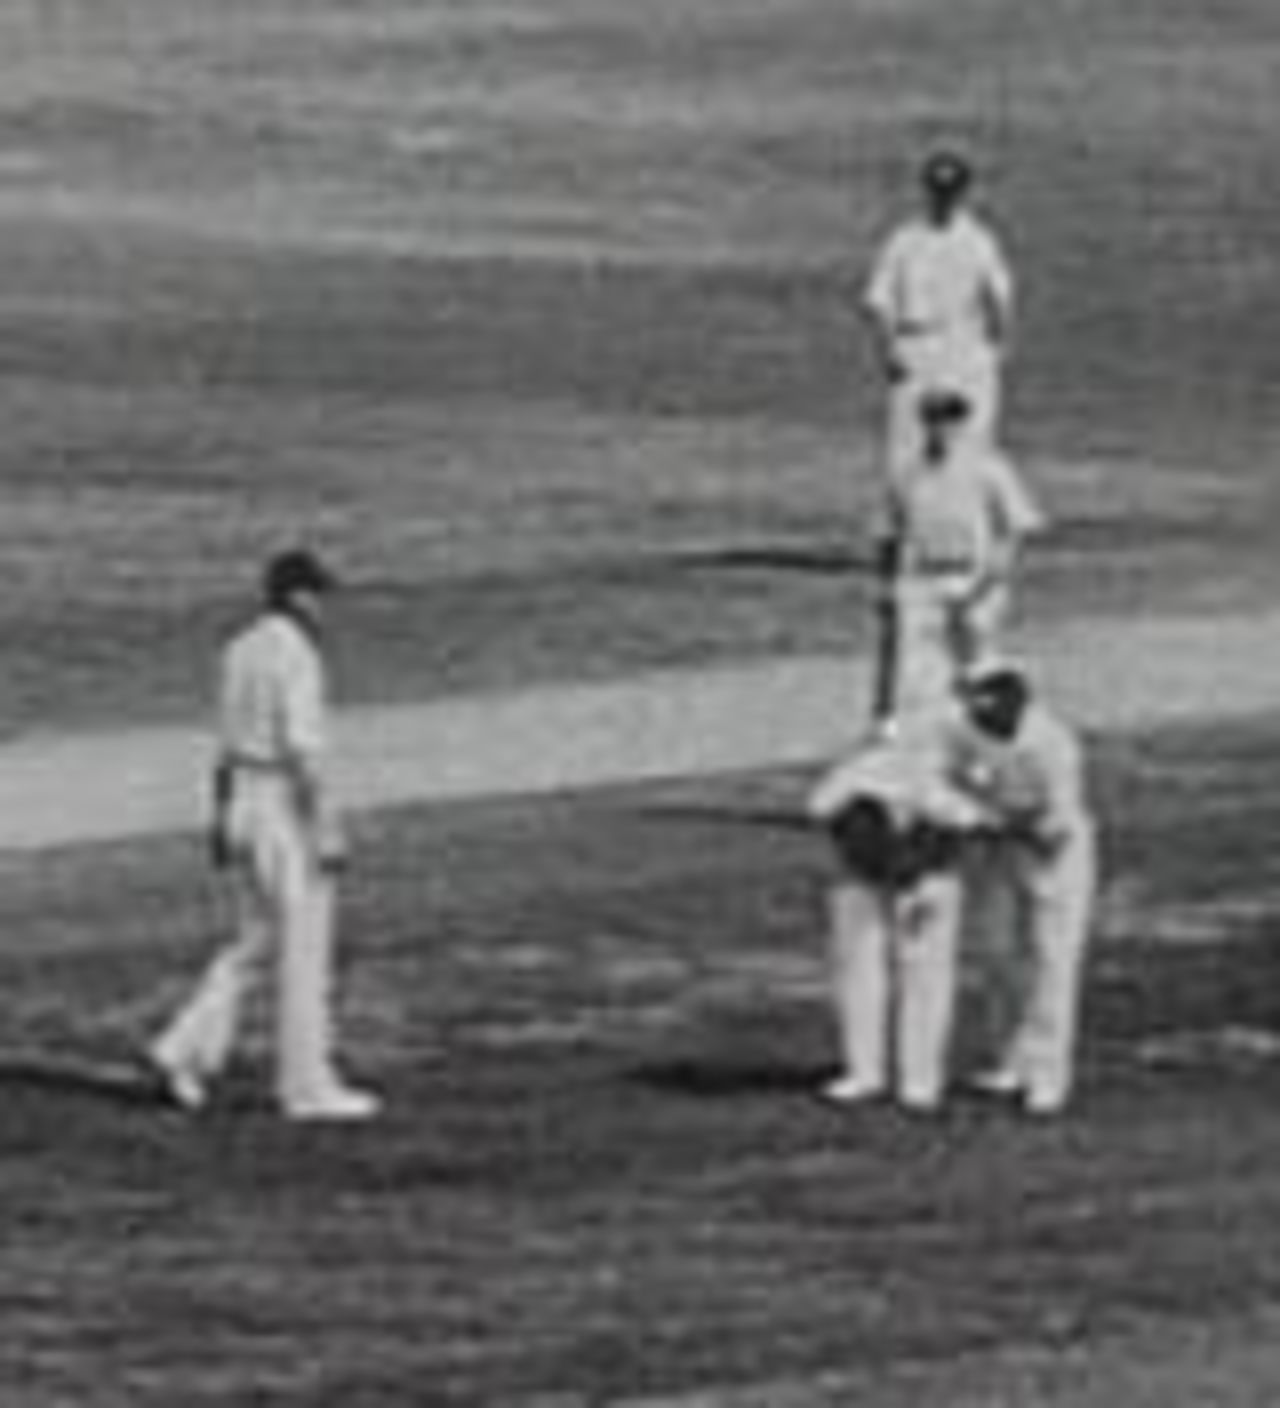 Bill Woodfull is consoled after being struck by Harold Larwood, Australia v England, 3rd Test, Adelaide, January 16, 1933